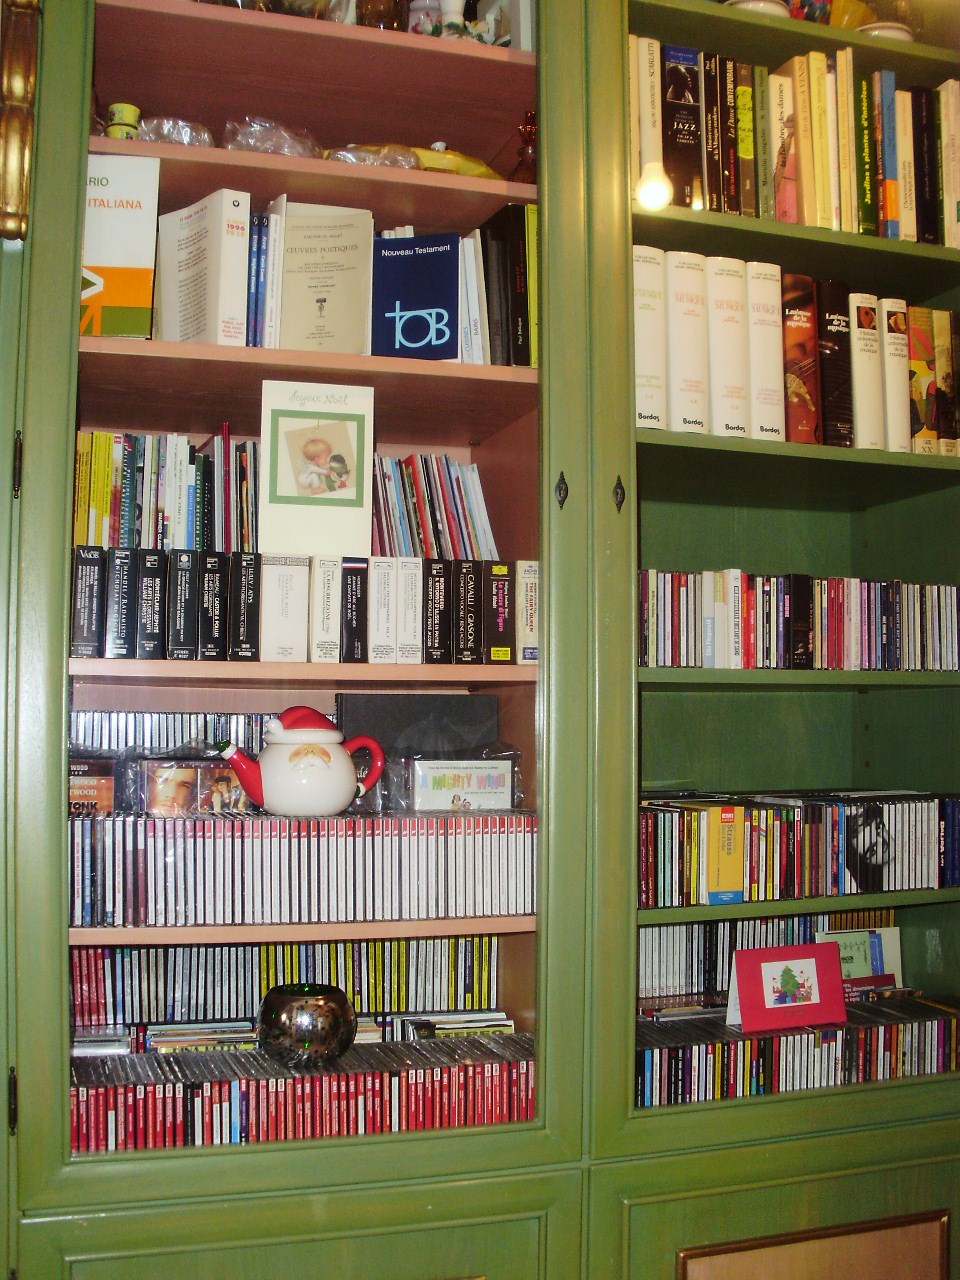 a bookshelf is full of different books in green